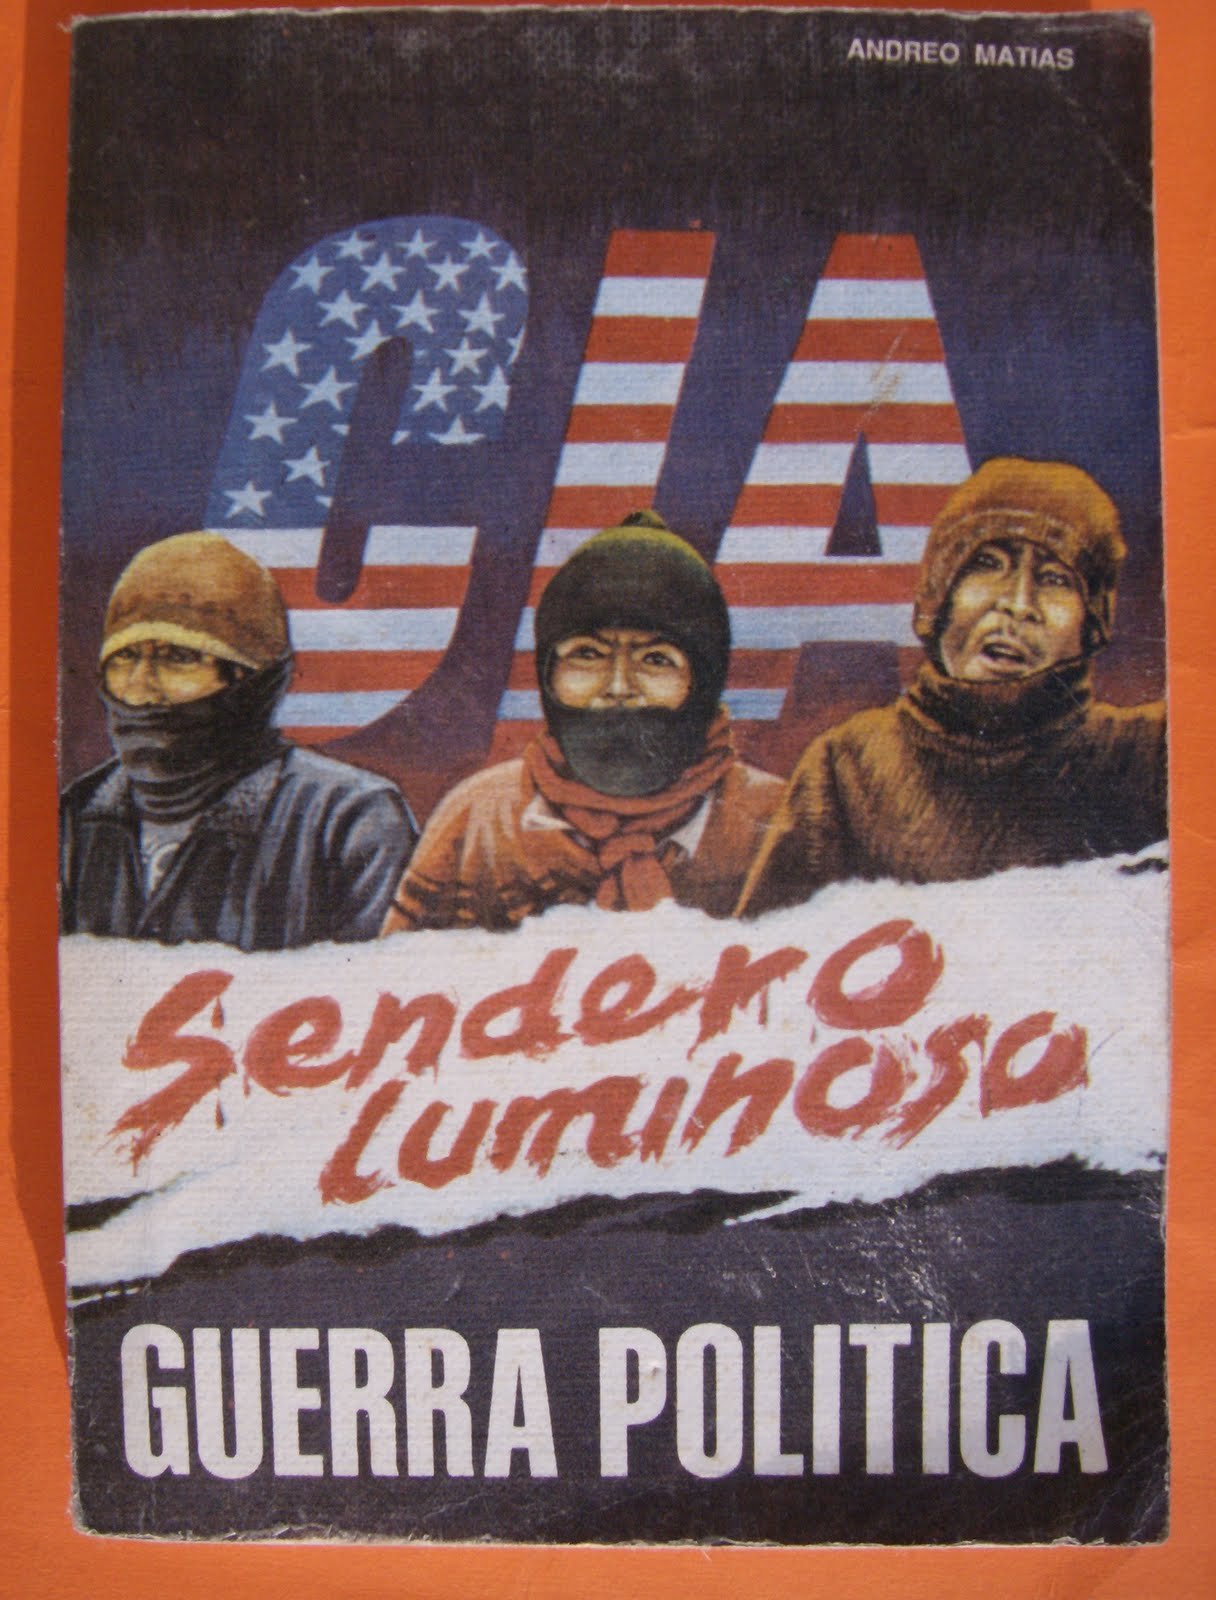 This book is about the role of the Shining Path in Peruvian politics. Translated to English by Prolewiki.